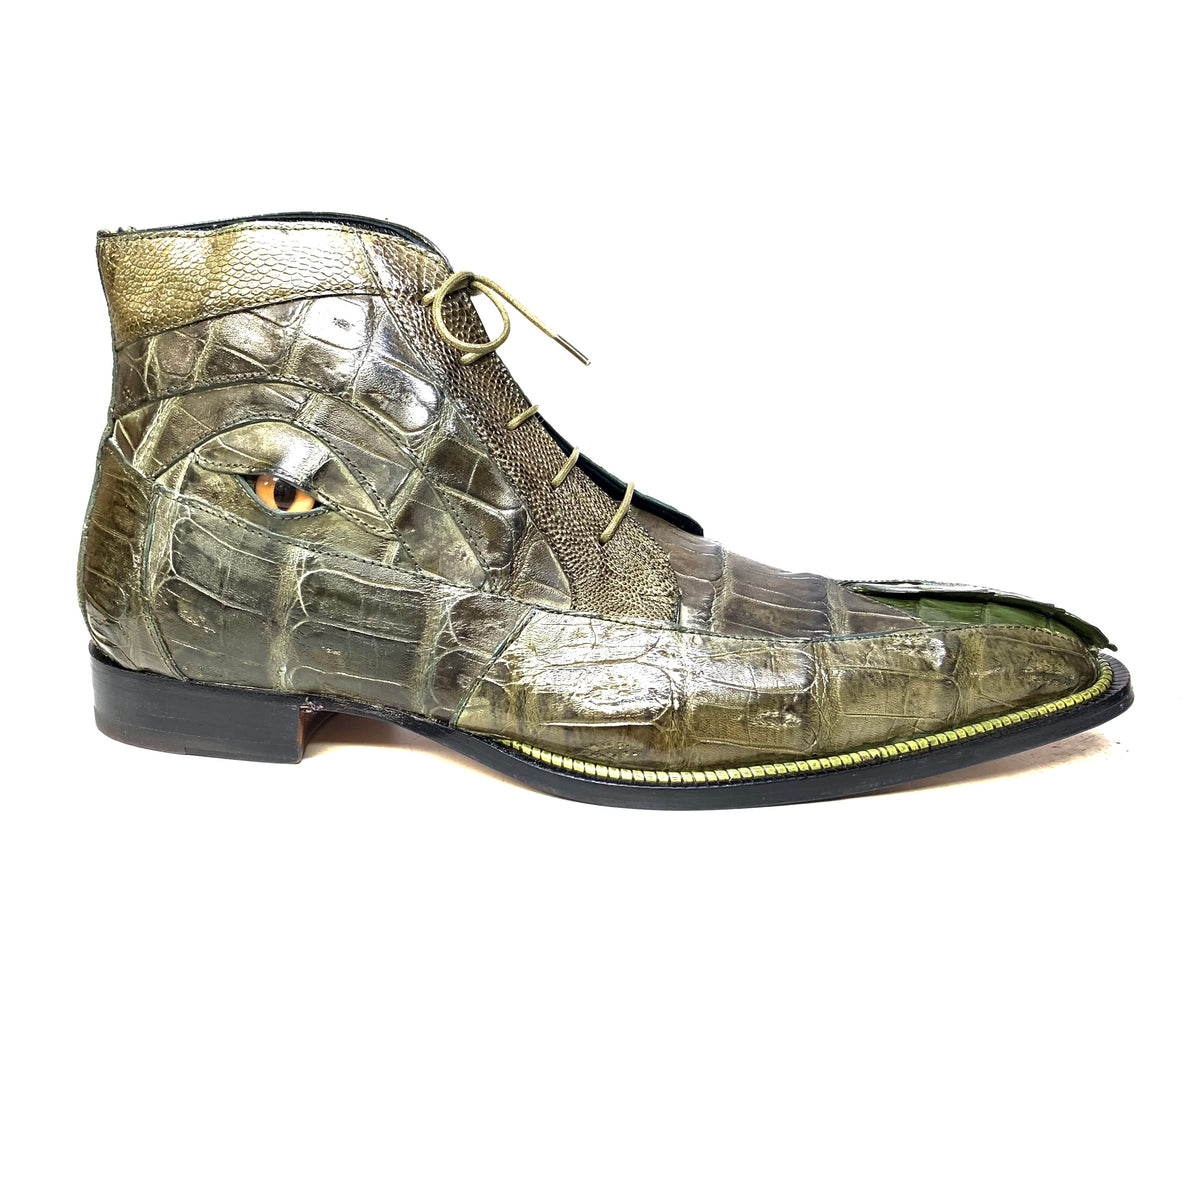 Mauri-3079 "Eye" Olive Green Alligator Tail / Ostrich Leg Dress Ankle Boots - Dudes Boutique